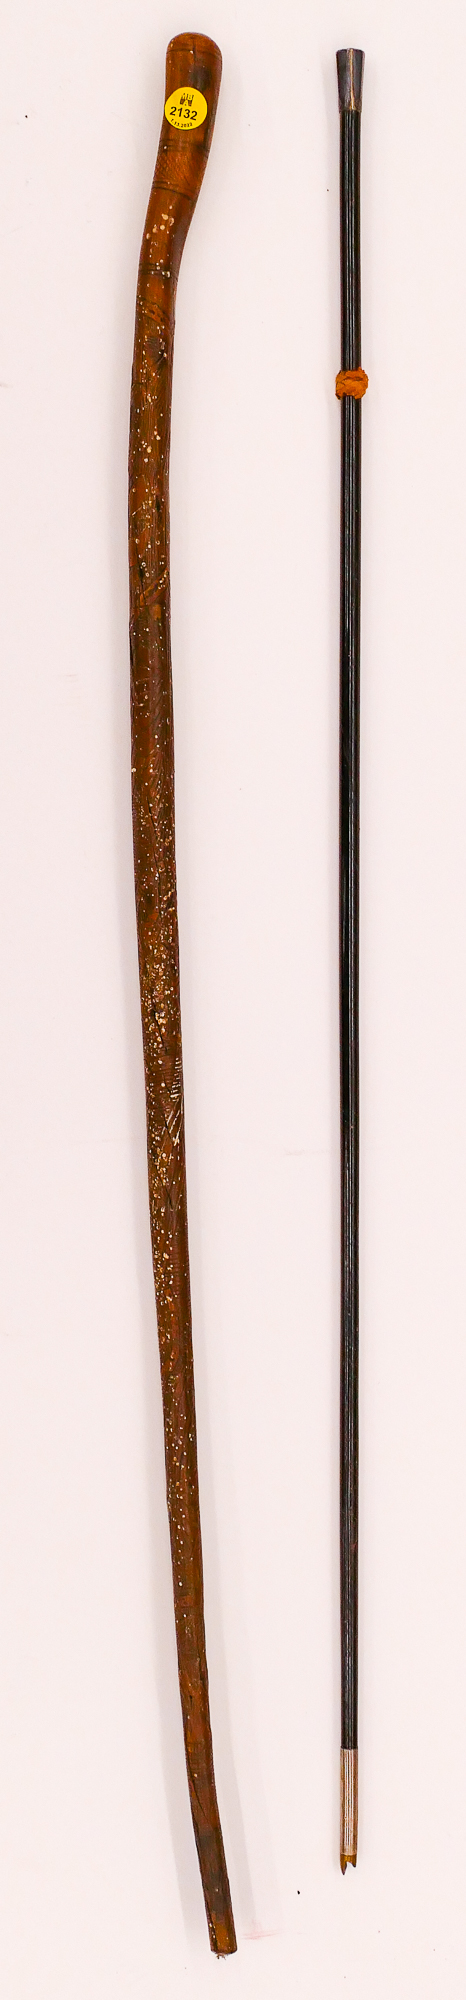 2pc Antique Walking Sticks- 33 and